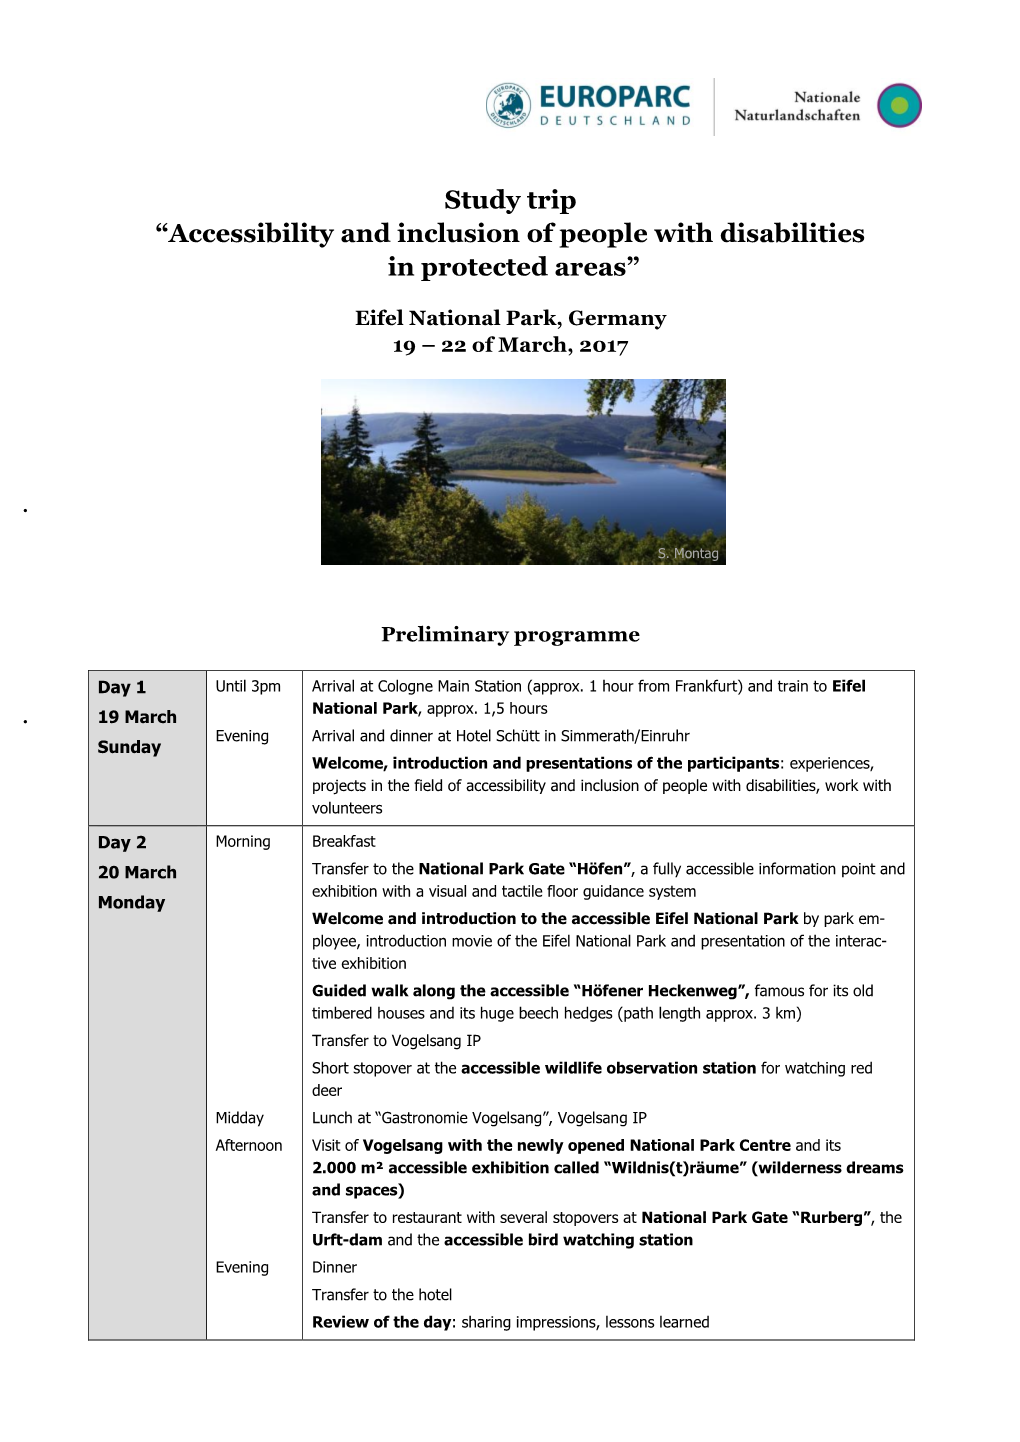 Study Trip “Accessibility and Inclusion of People with Disabilities in Protected Areas”